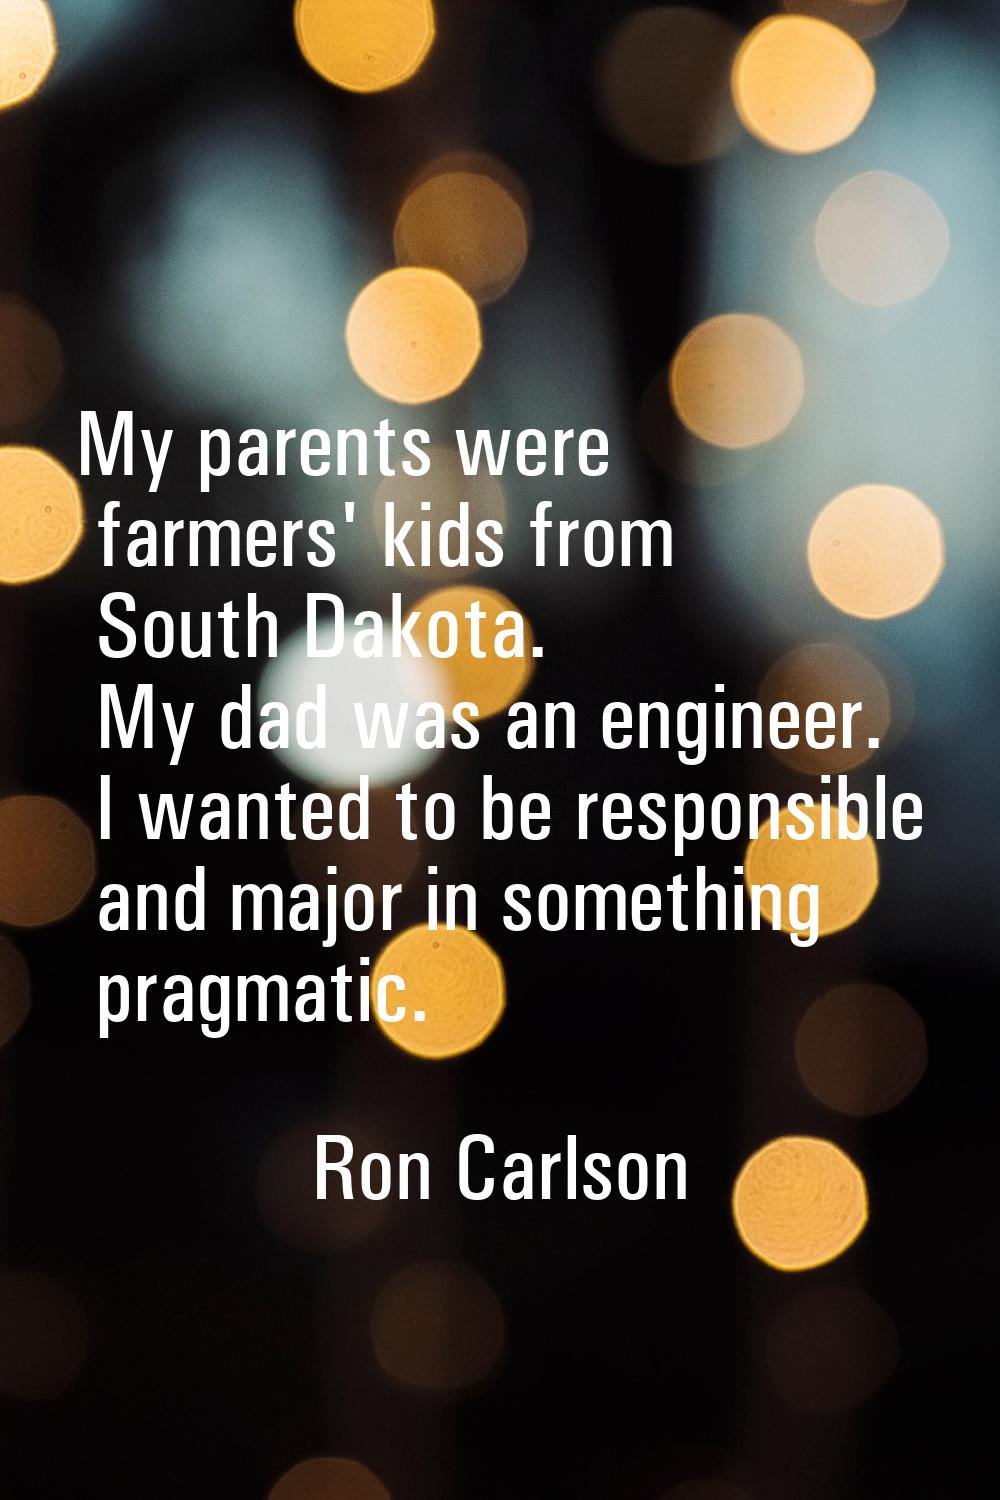 My parents were farmers' kids from South Dakota. My dad was an engineer. I wanted to be responsible